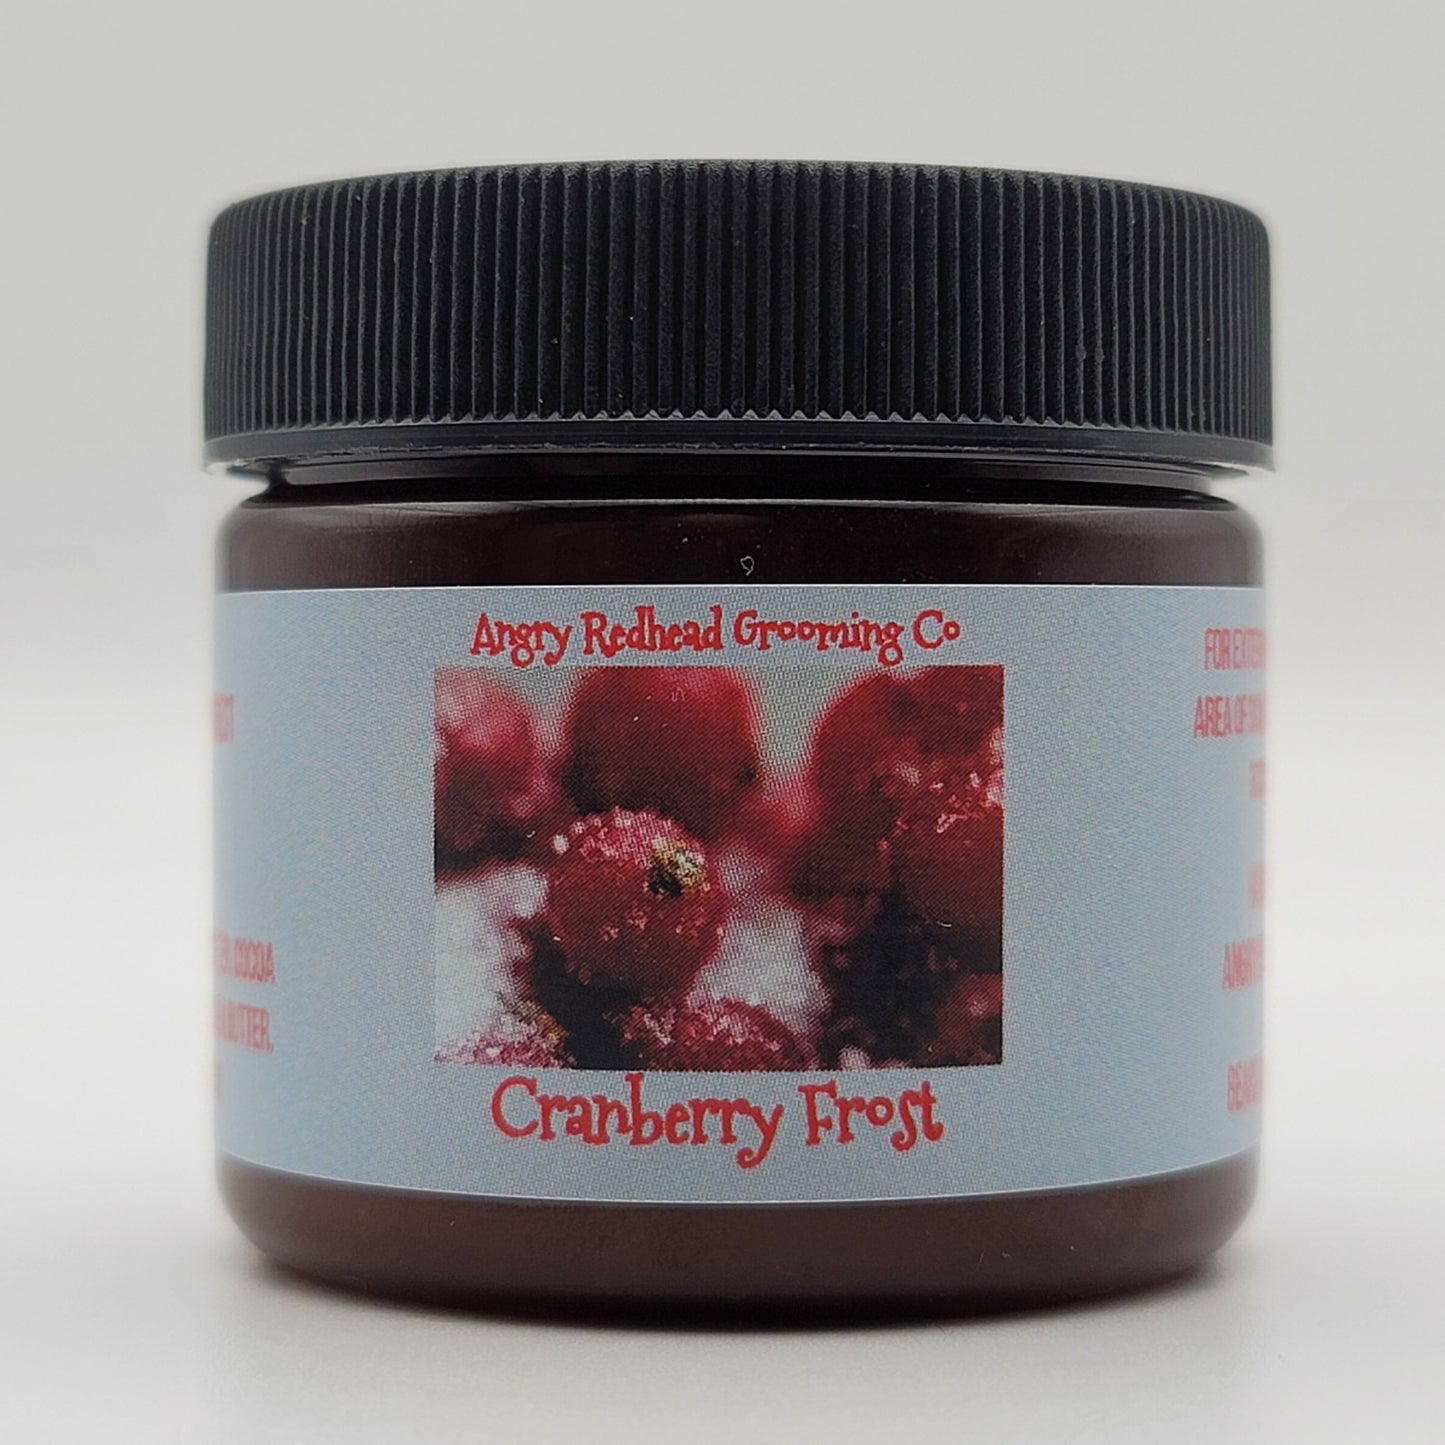 Cranberry Frost Beard Butter by Angry Redhead Grooming Co - angryredheadgrooming.com